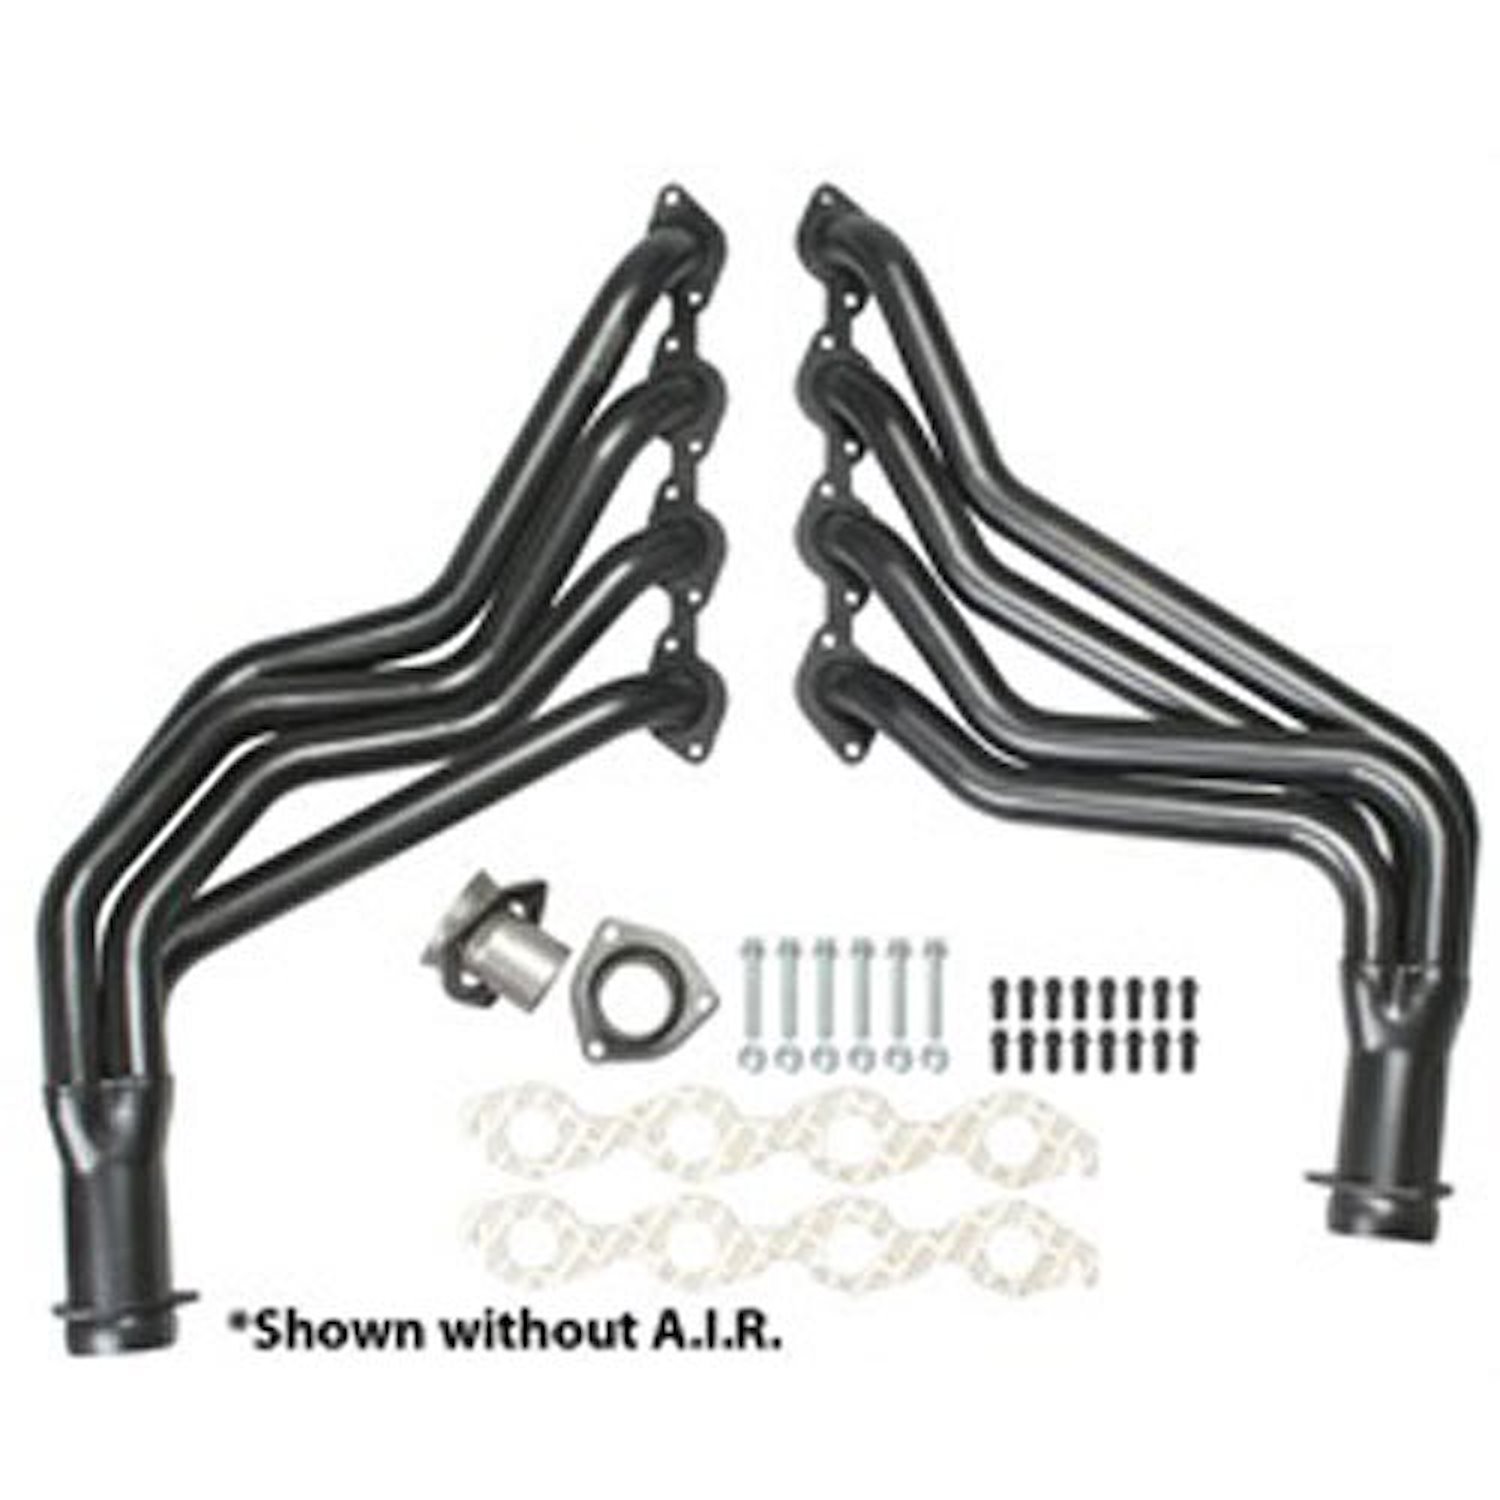 Standard Duty Uncoated Full Length Headers for 1967-91 Chevy/GMC Truck/SUV 2WD/4WD 396-502